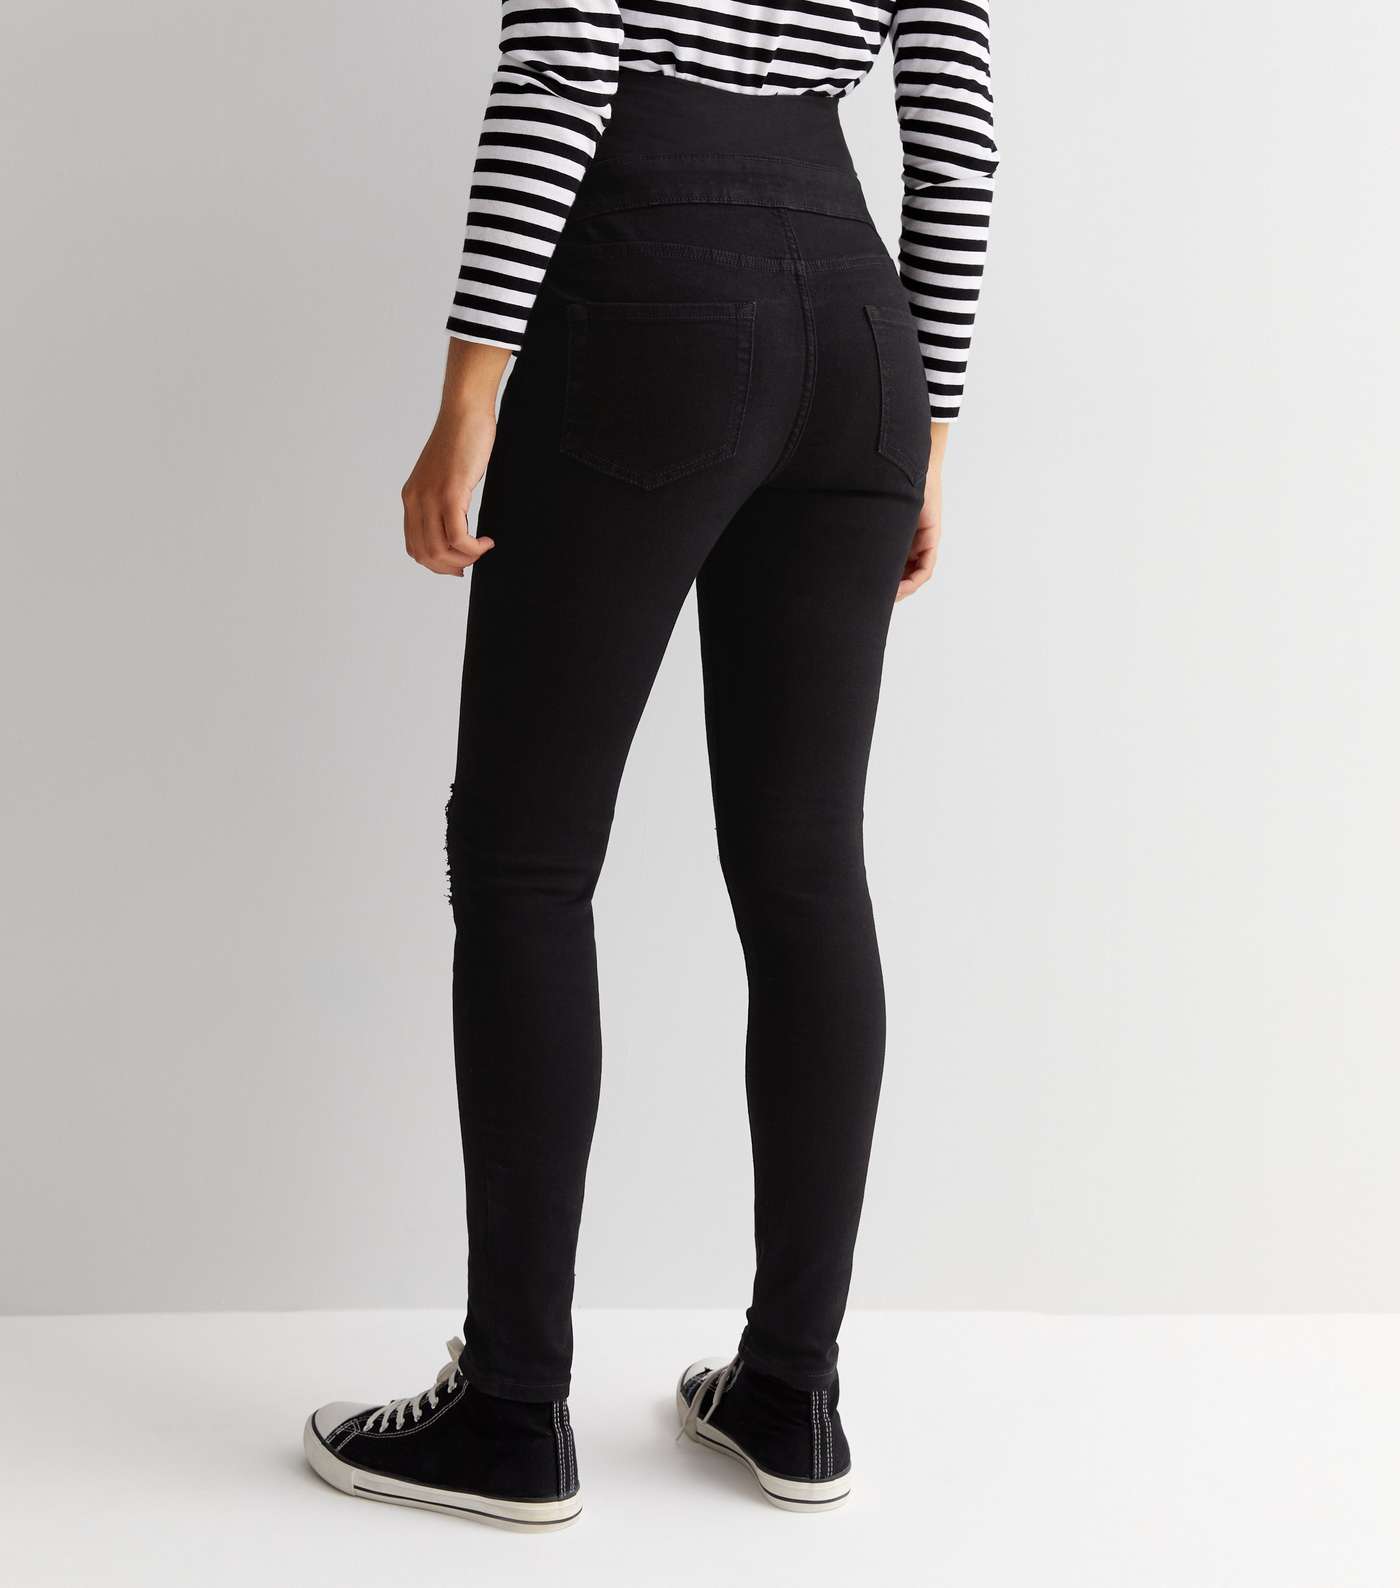 Maternity Black Ripped Over Bump Hallie Skinny Jeans Image 4